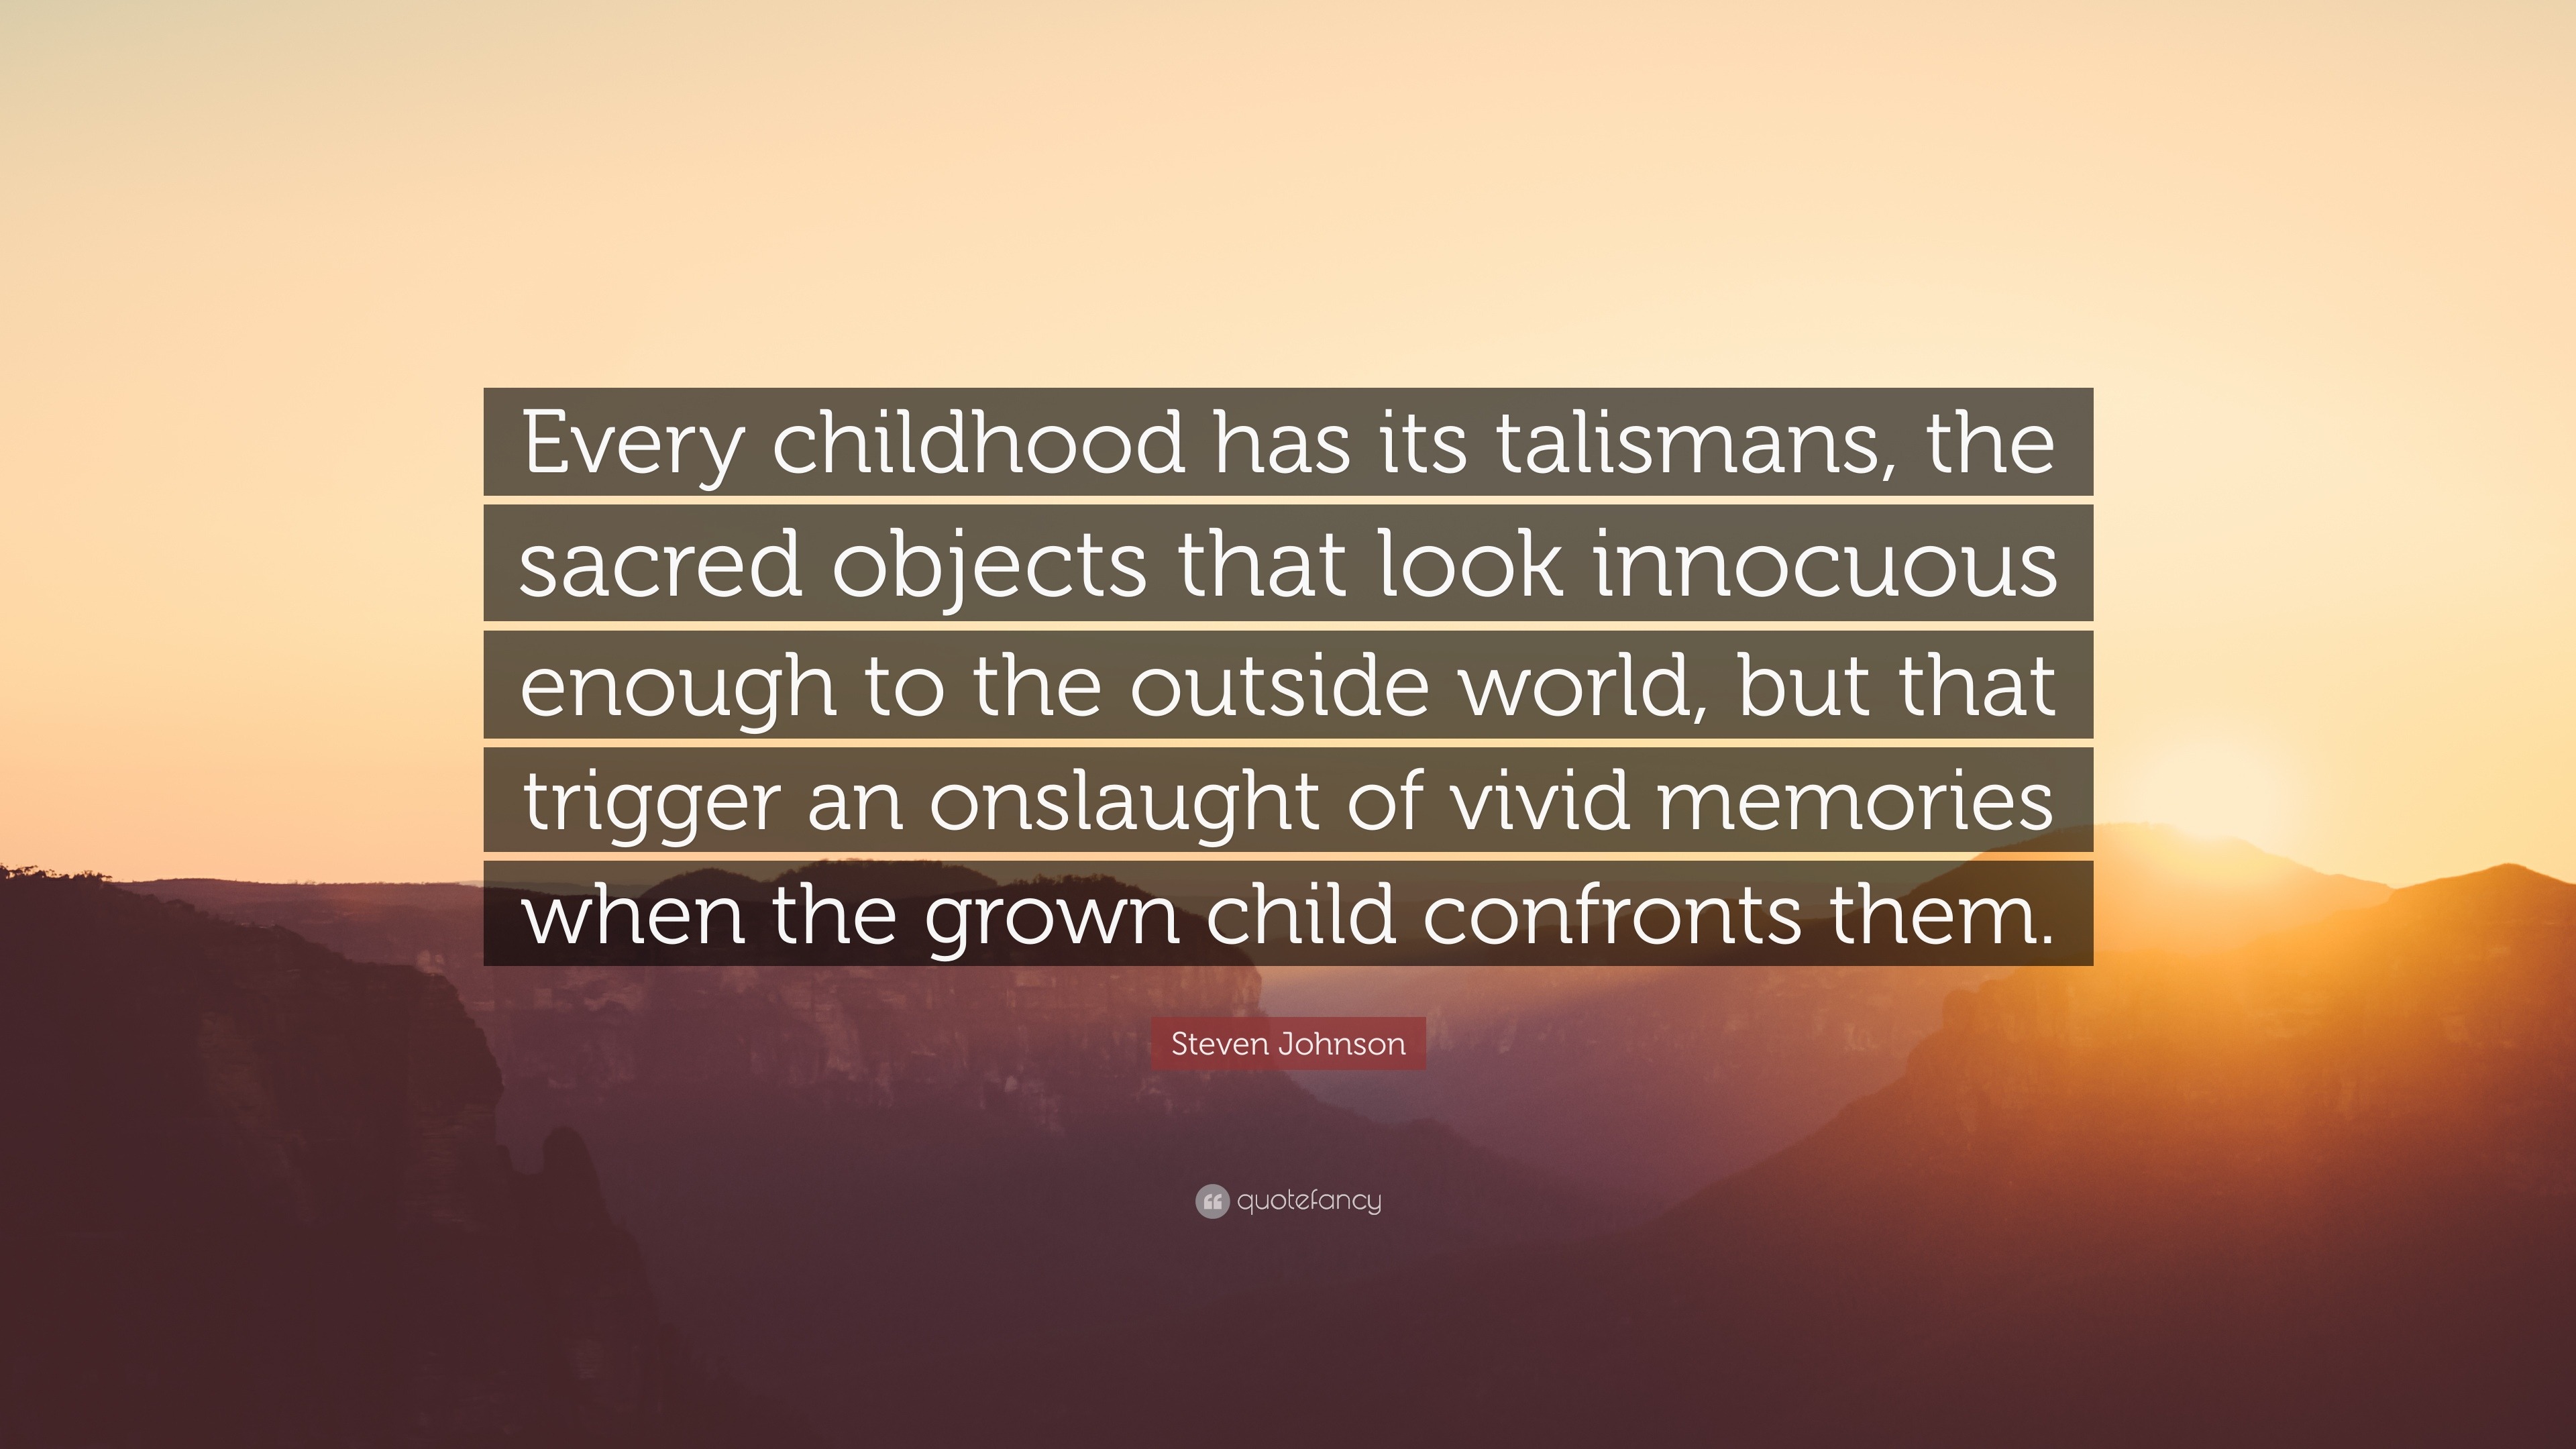 Steven Johnson Quote: “Every childhood has its talismans, the sacred  objects that look innocuous enough to the outside world, but that trigger  ...”